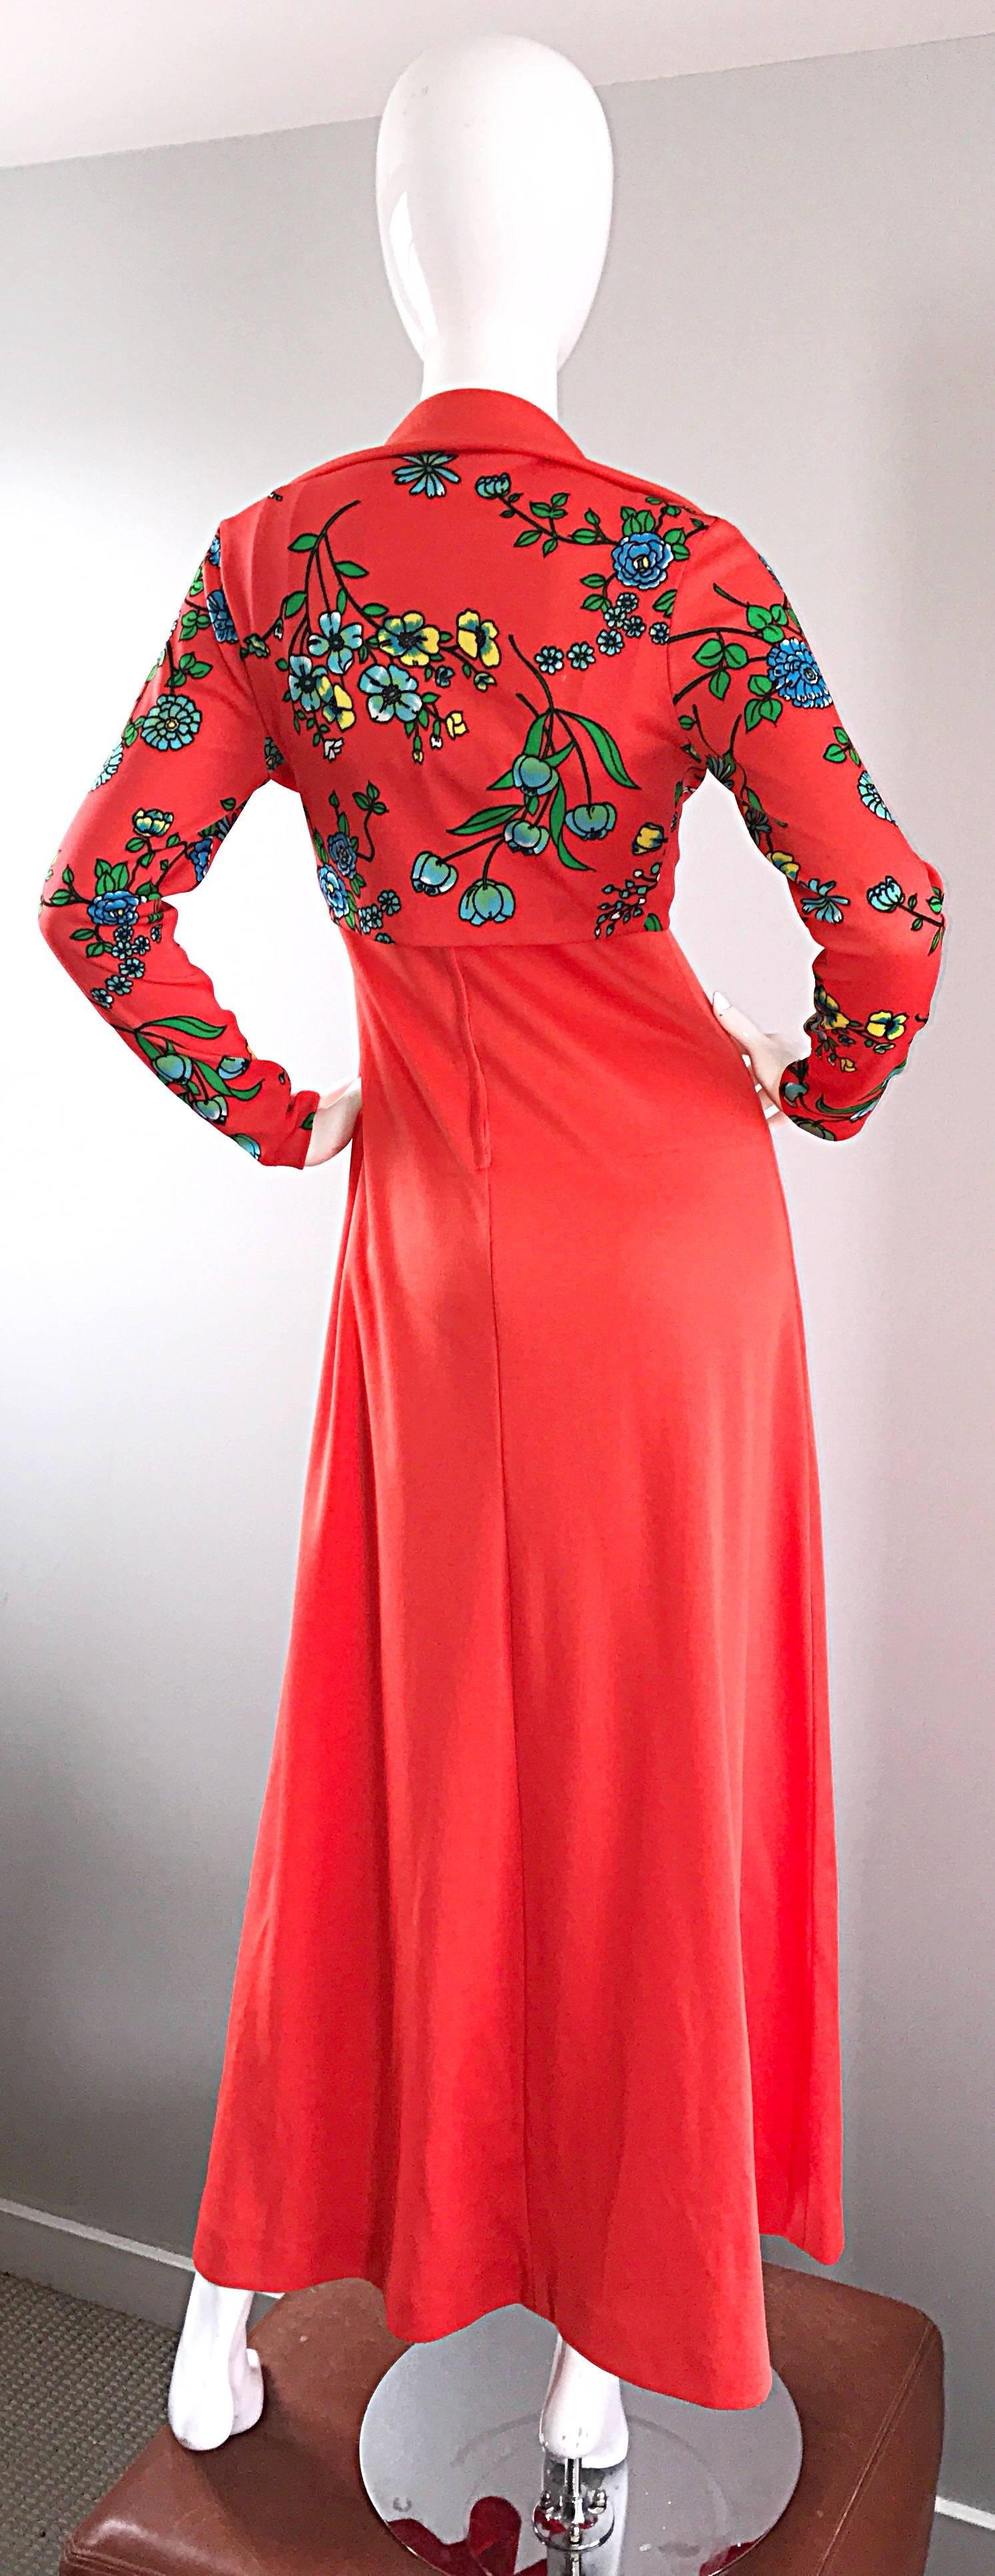 Red Amazing 1970s Bright Neon Orange Vintage 70s Knit Maxi Dress and Cropped Bolero For Sale